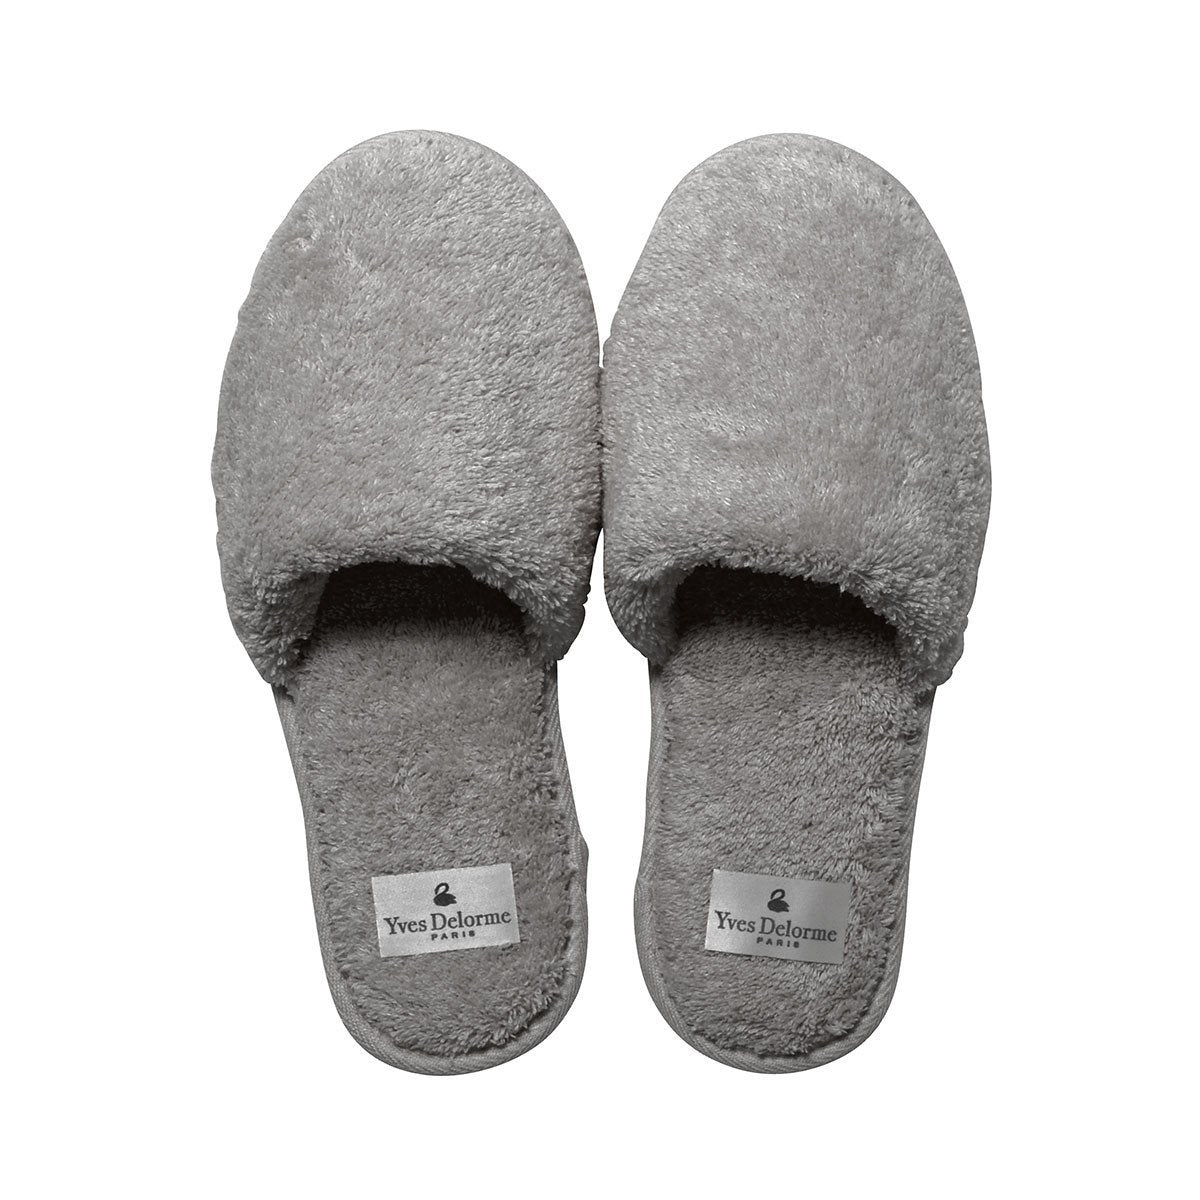 Etoile Platine Men's Slippers by Yves Delorme | Fig Linens and Home - gray slippers